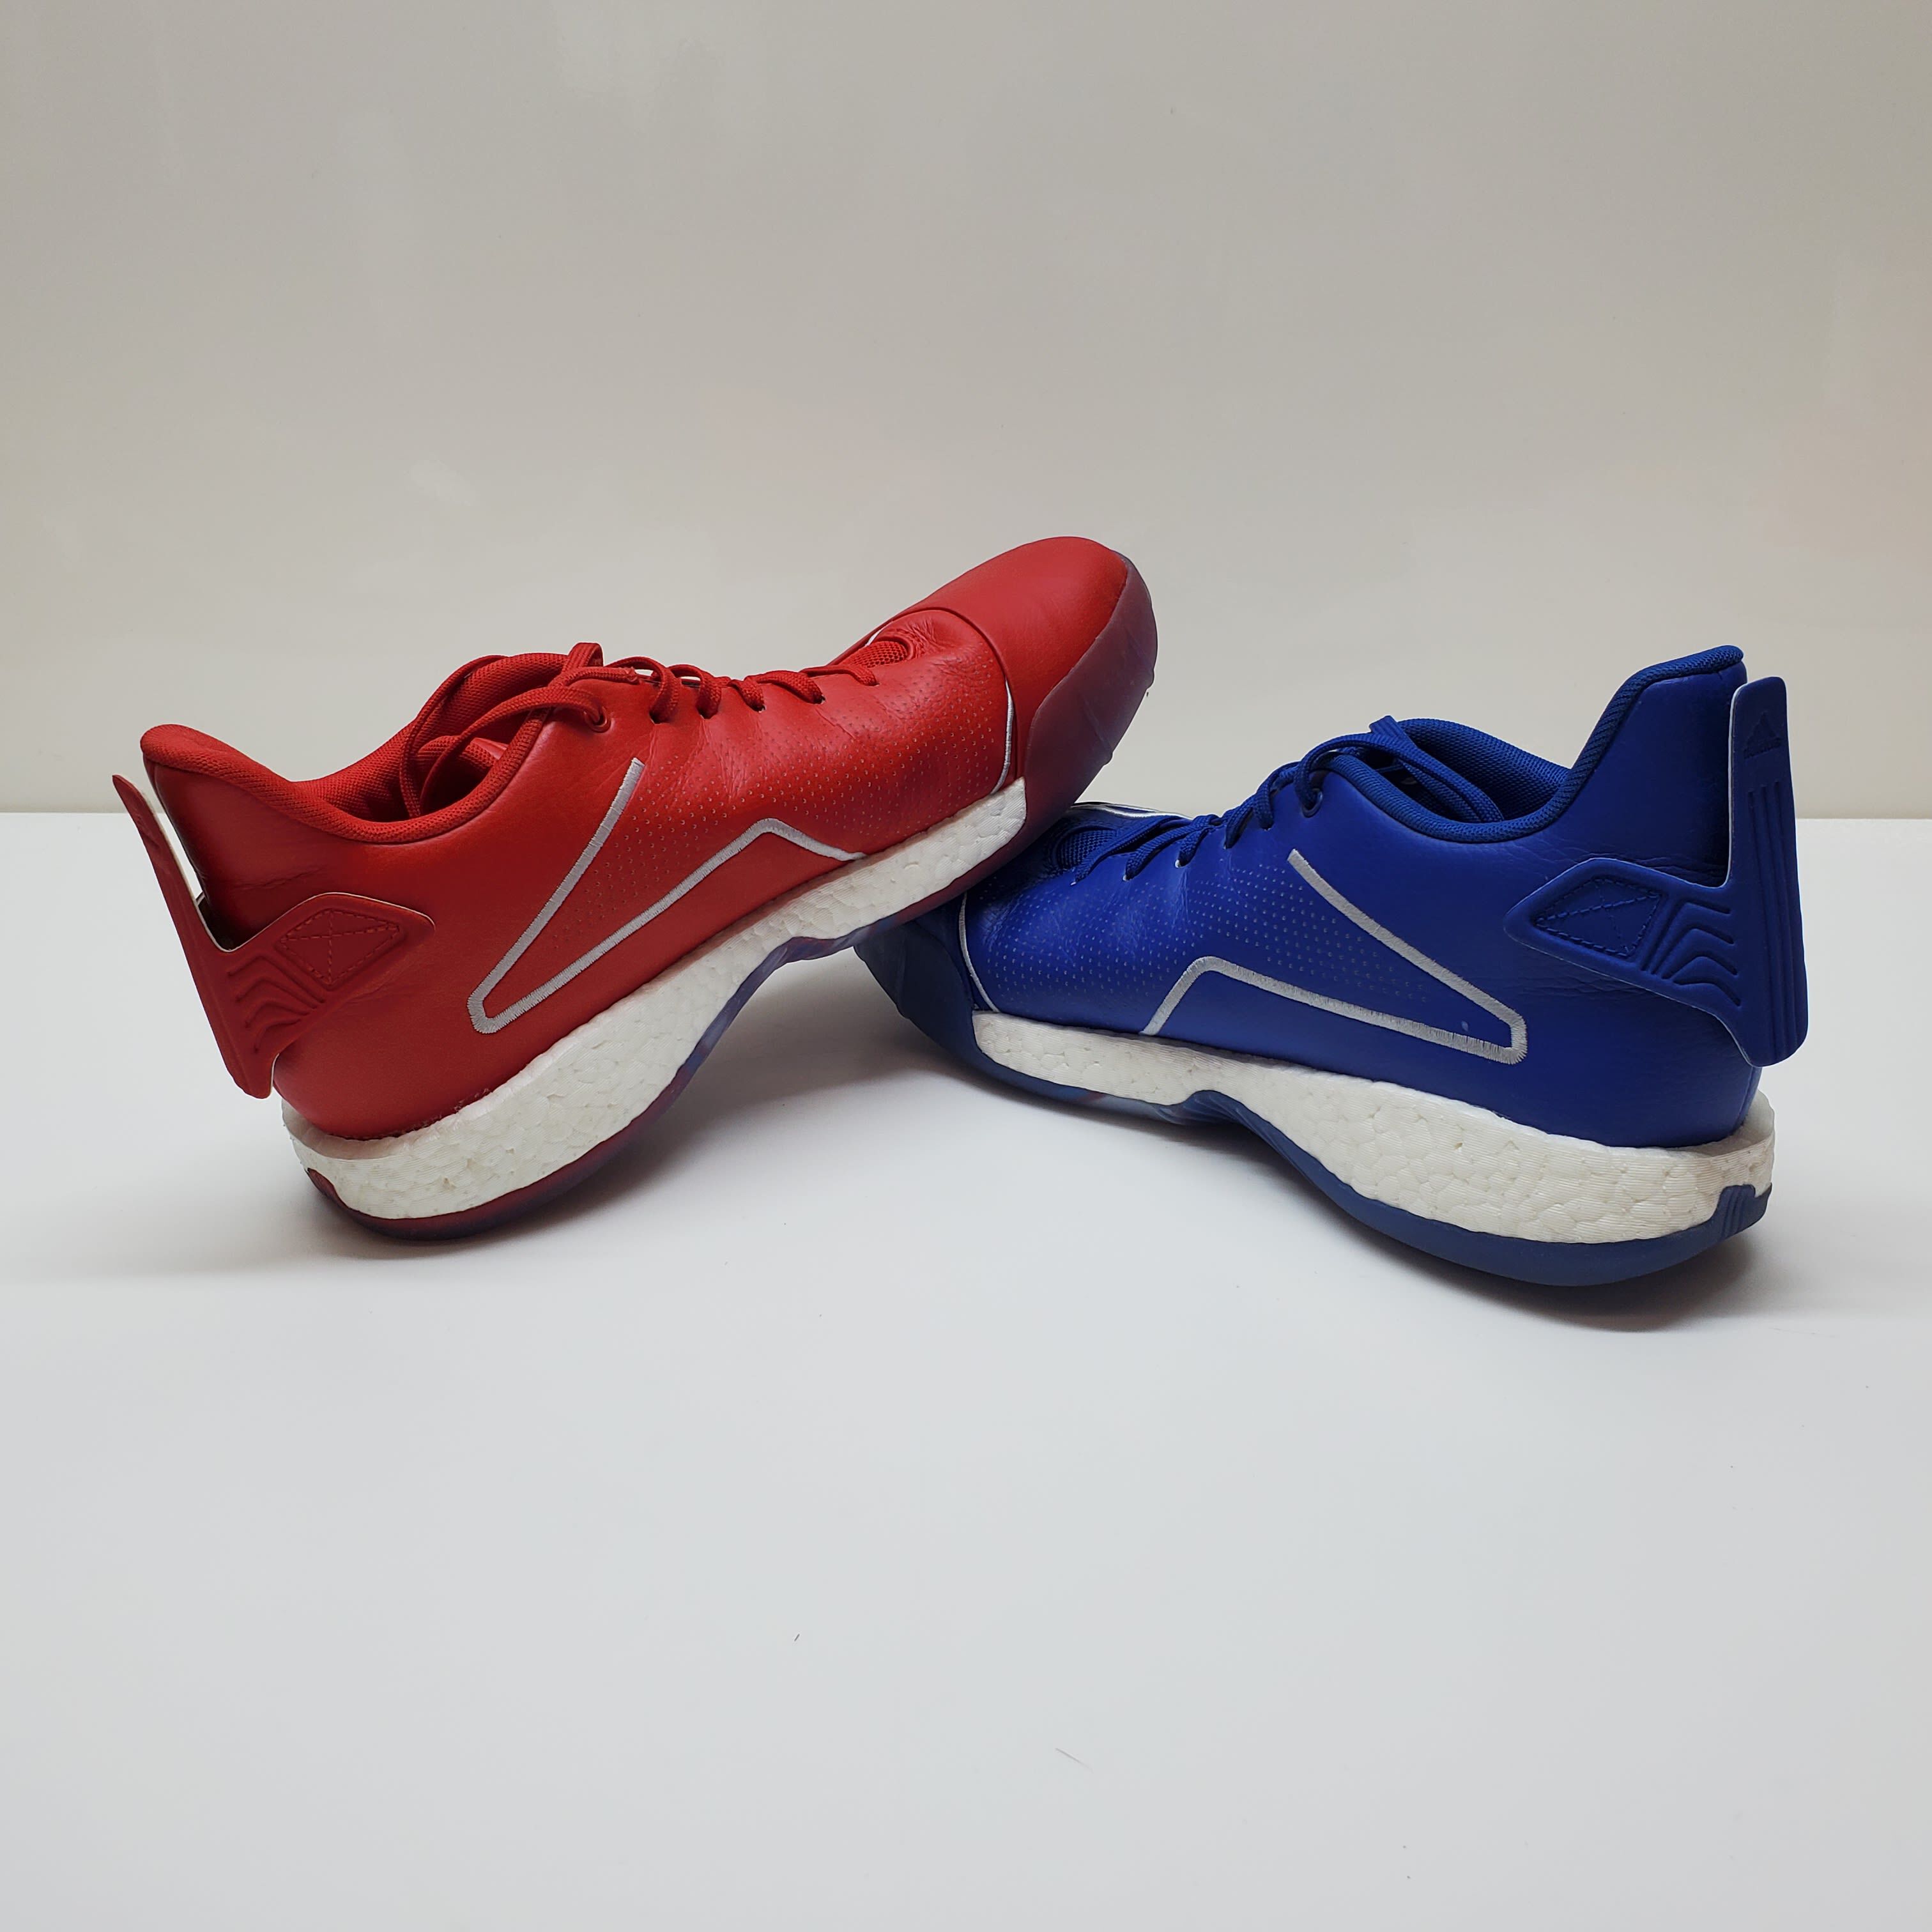 tracy mcgrady shoes for sale